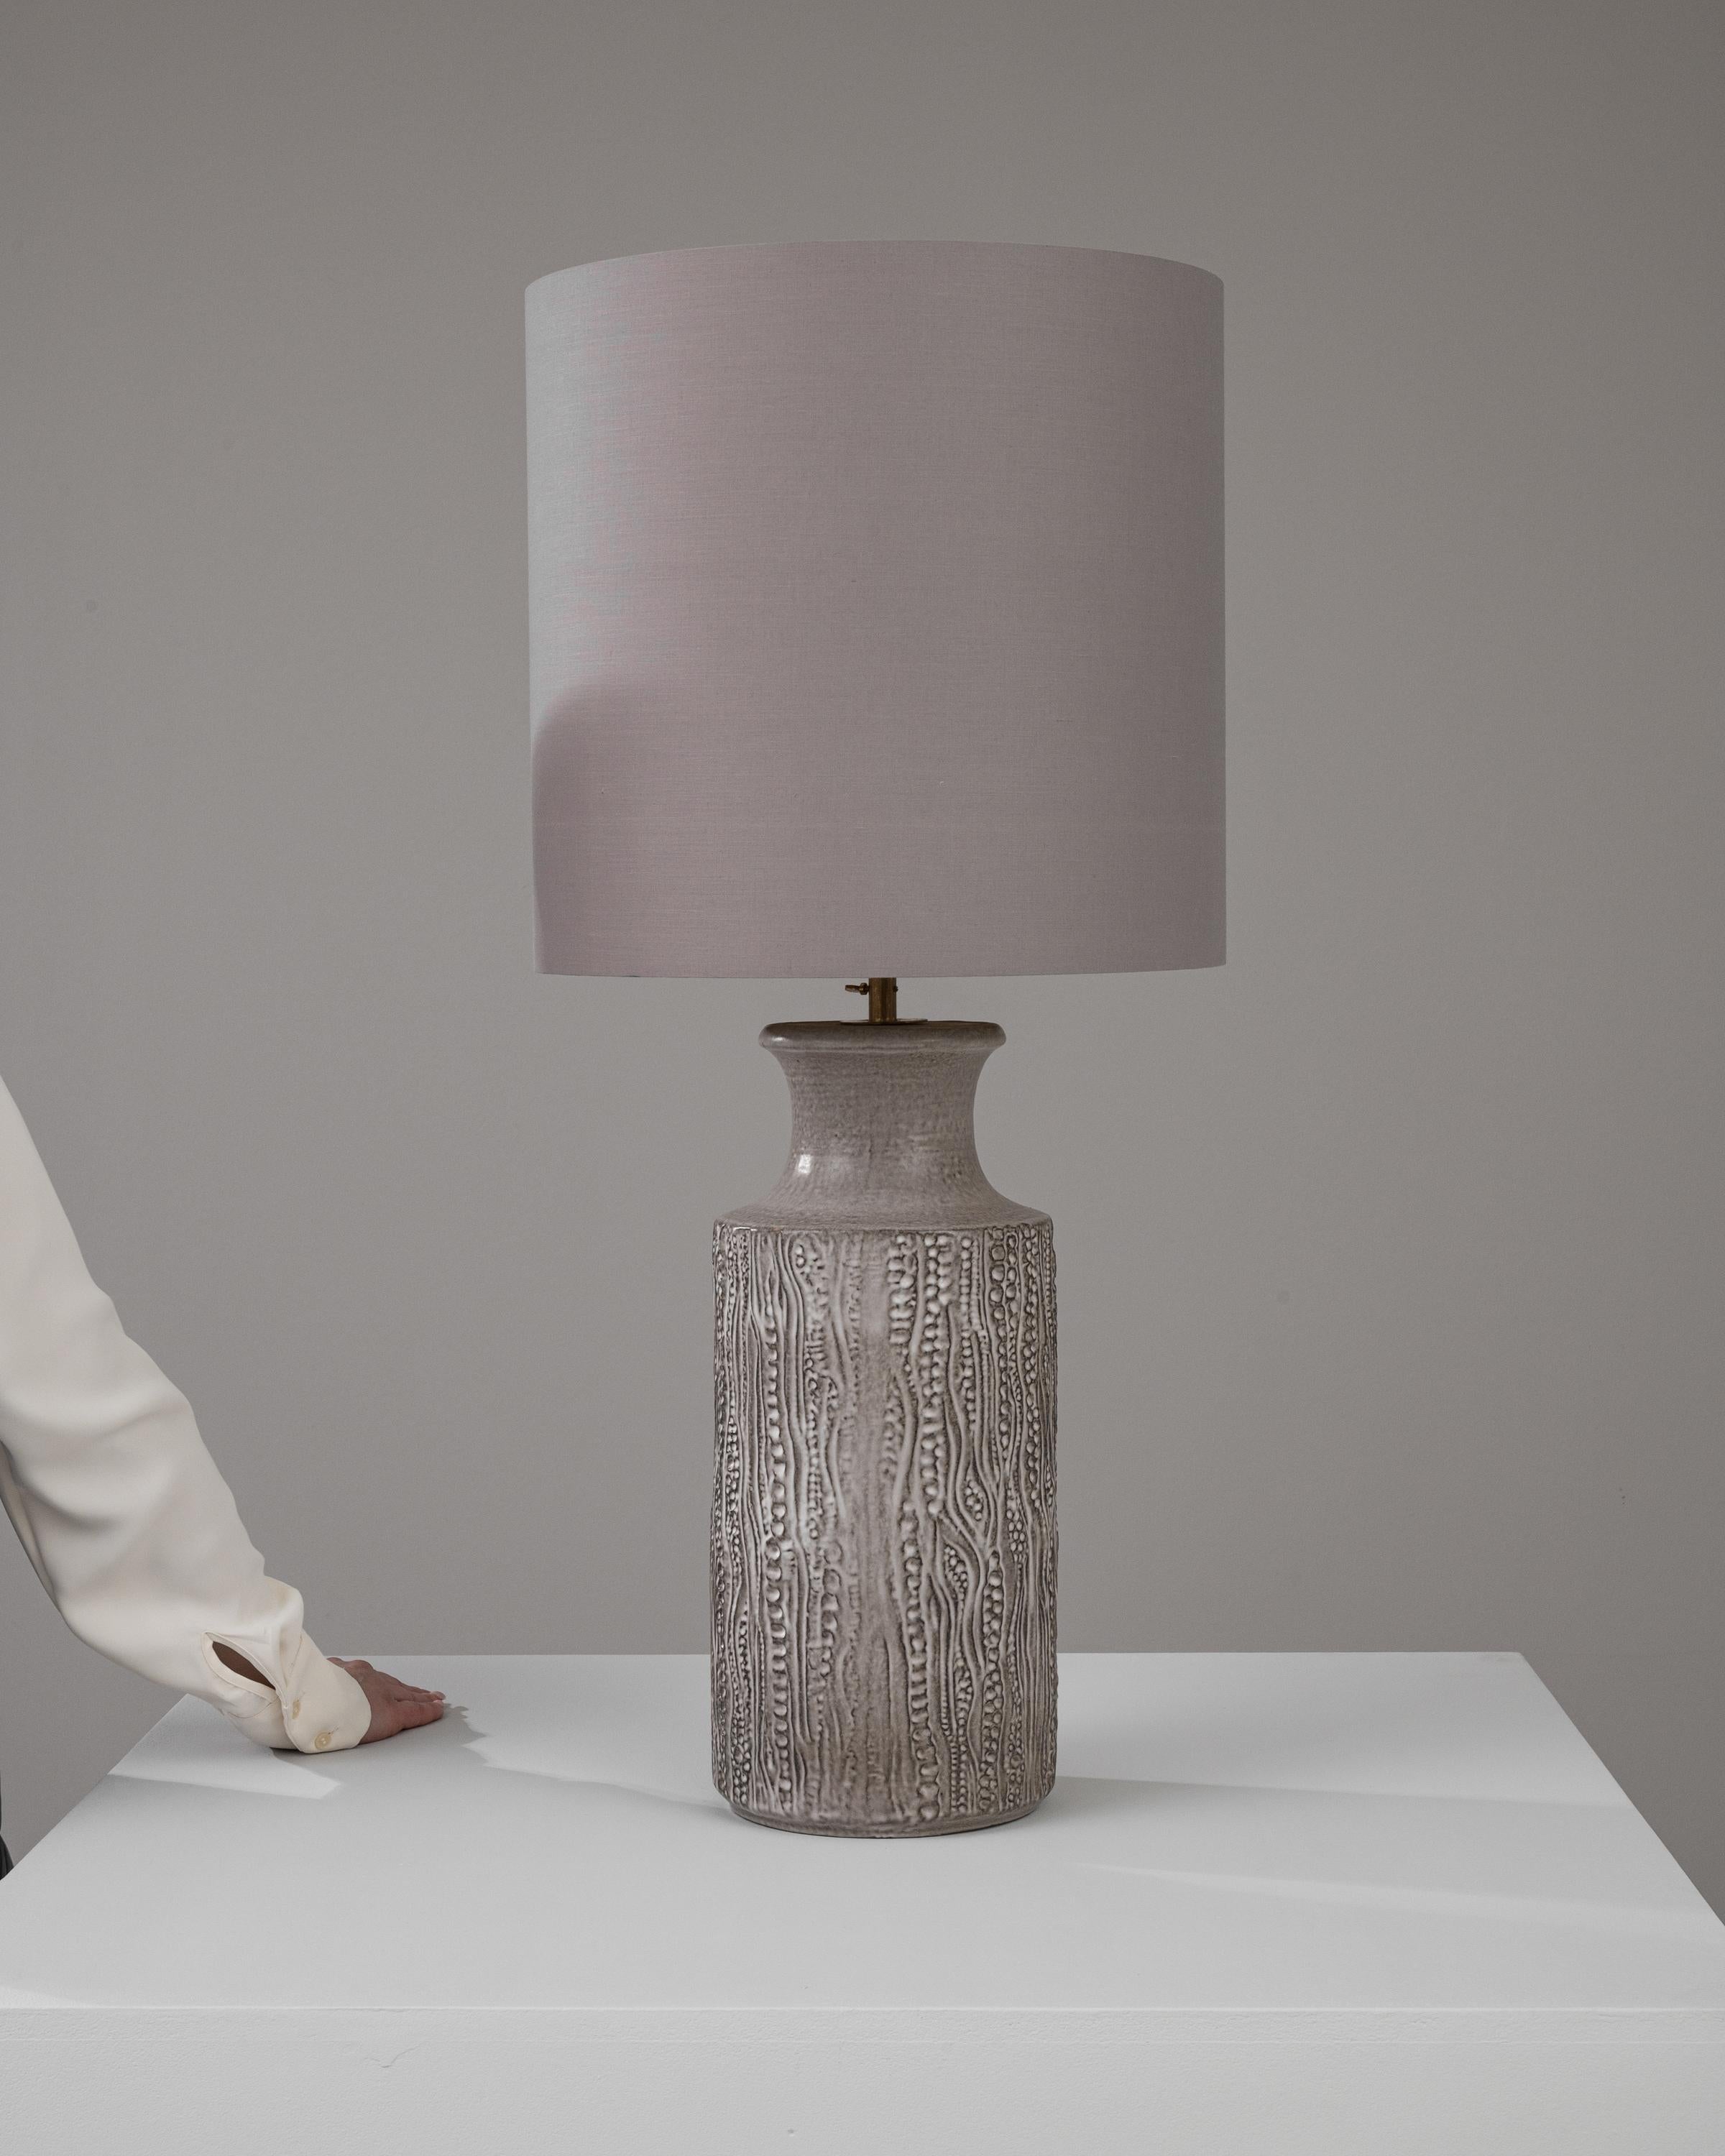 Bring a piece of 20th-century German design into your home with this characterful Ceramic Table Lamp, complete with a quaint side handle that offers both aesthetic charm and practicality. The lamp base captivates with its intricate, maze-like